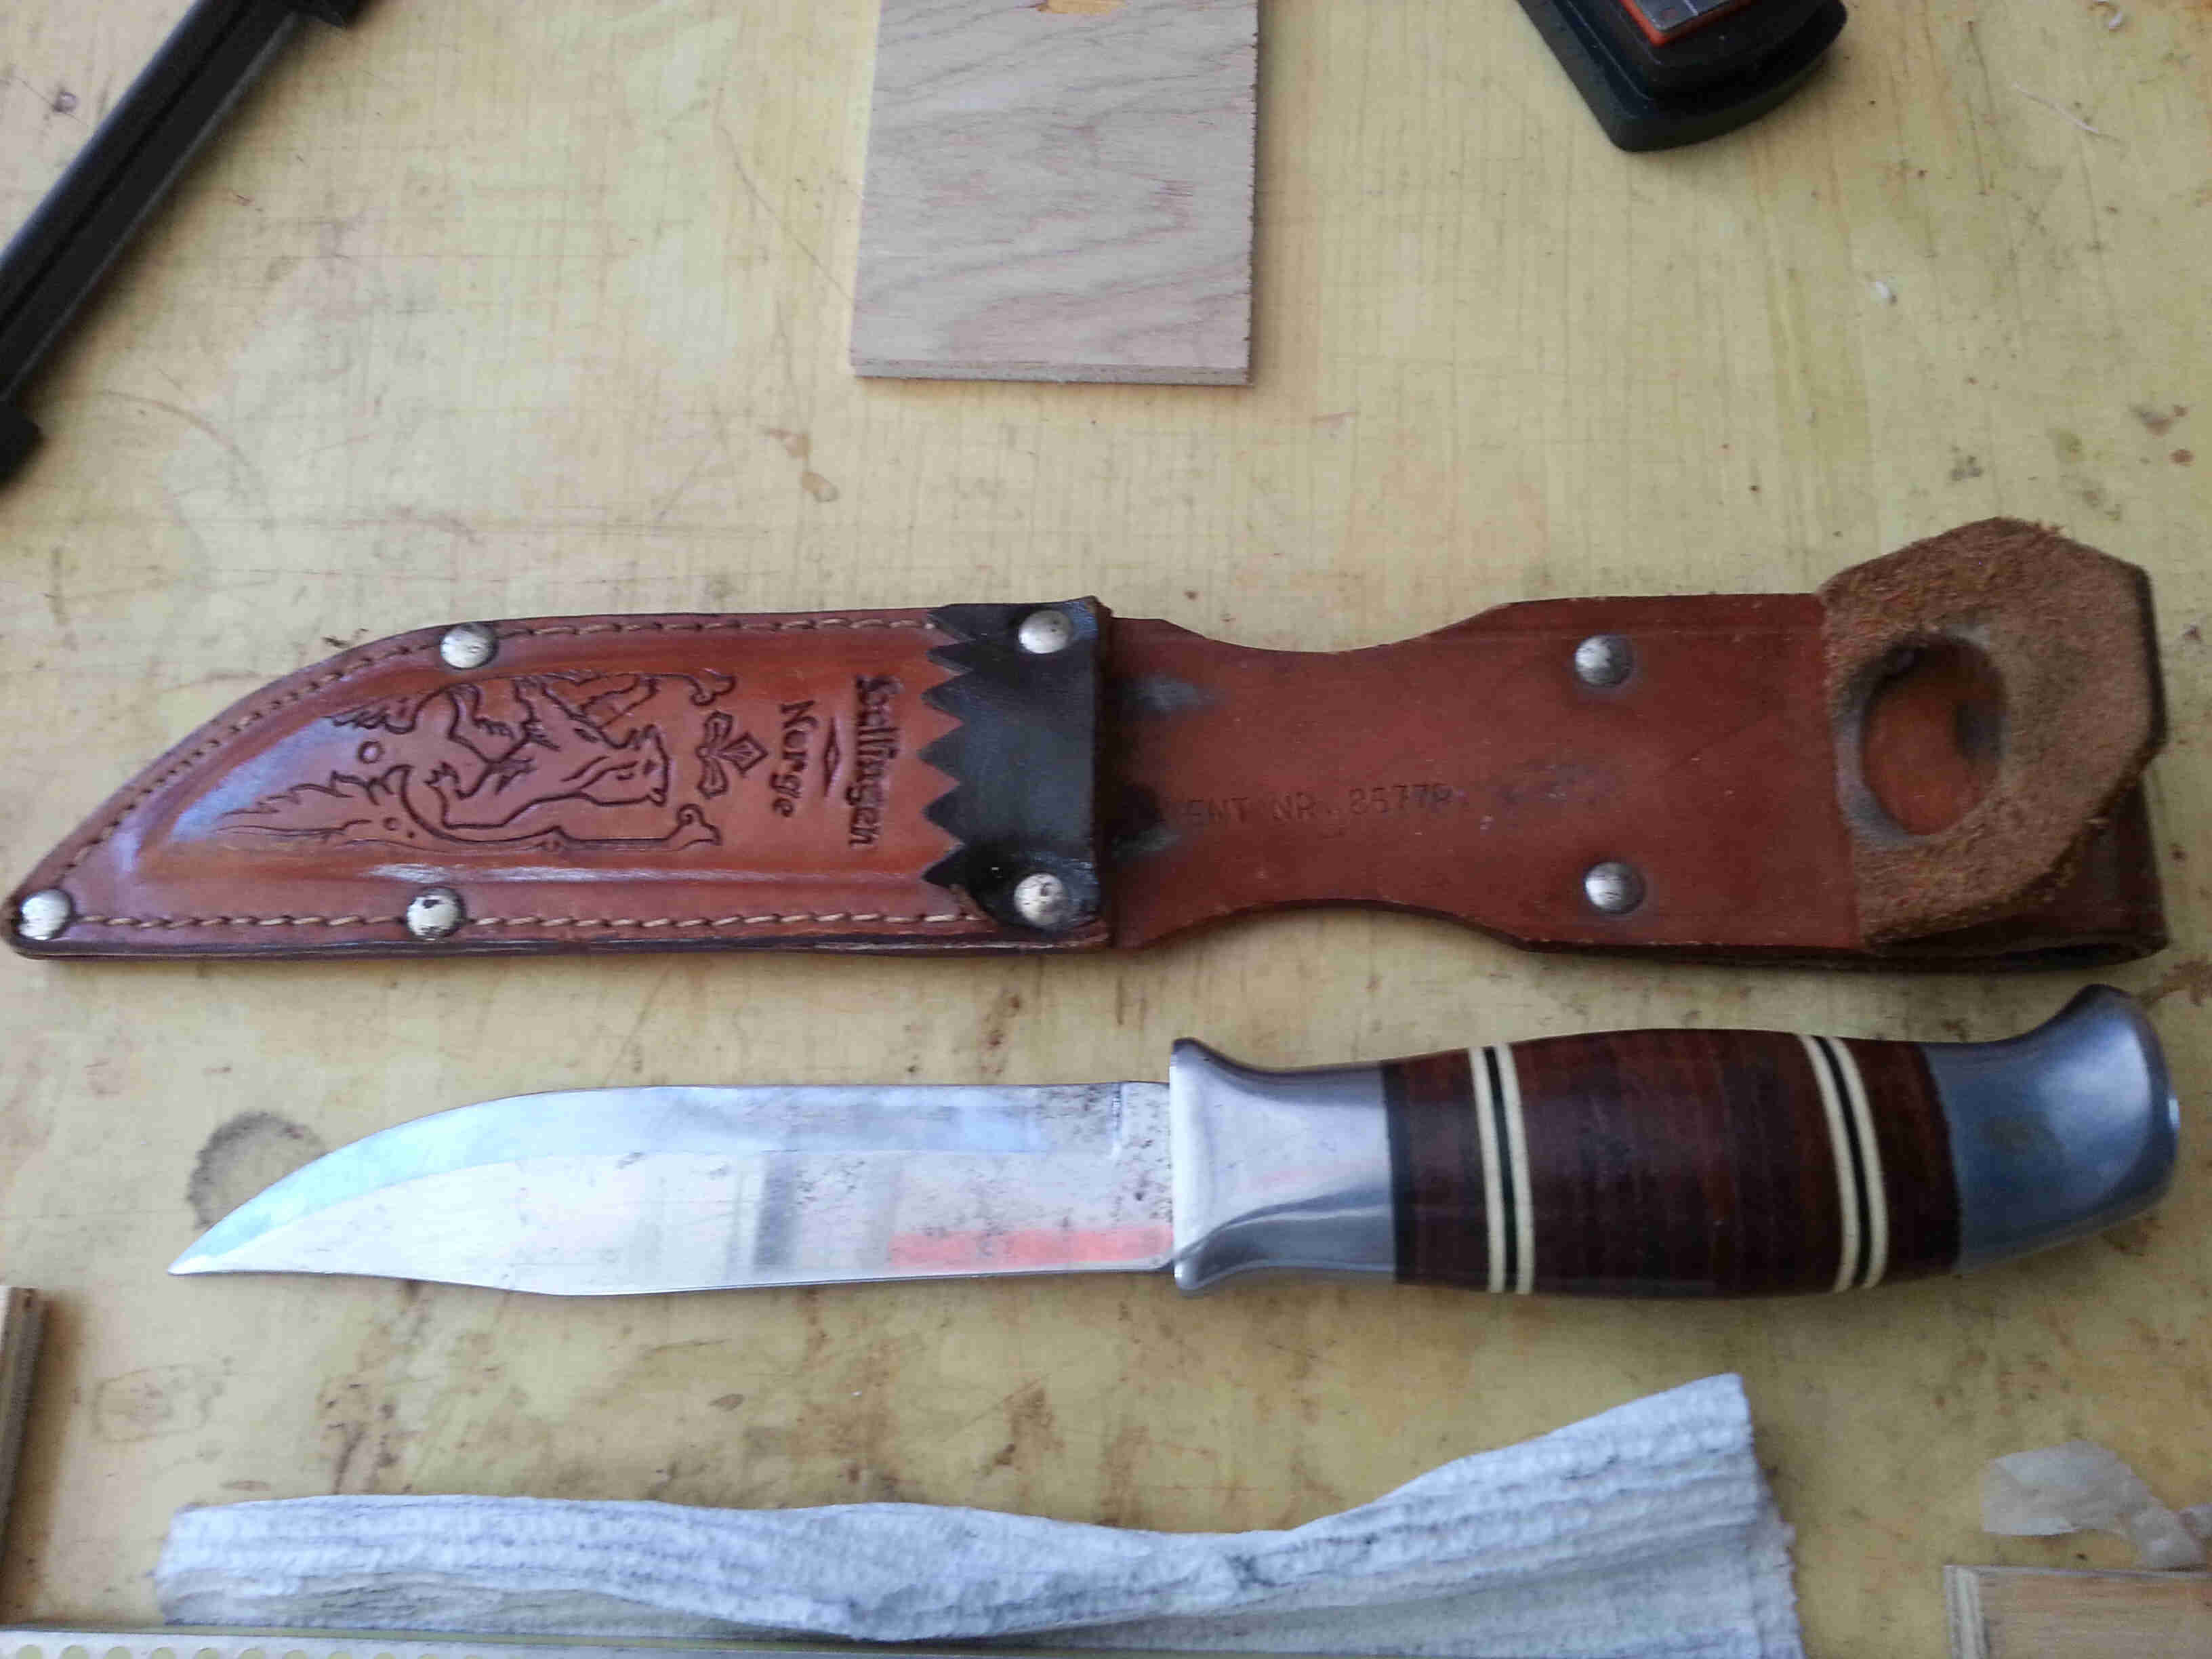 Downward view of a leather sheath, a knife and a white cloth